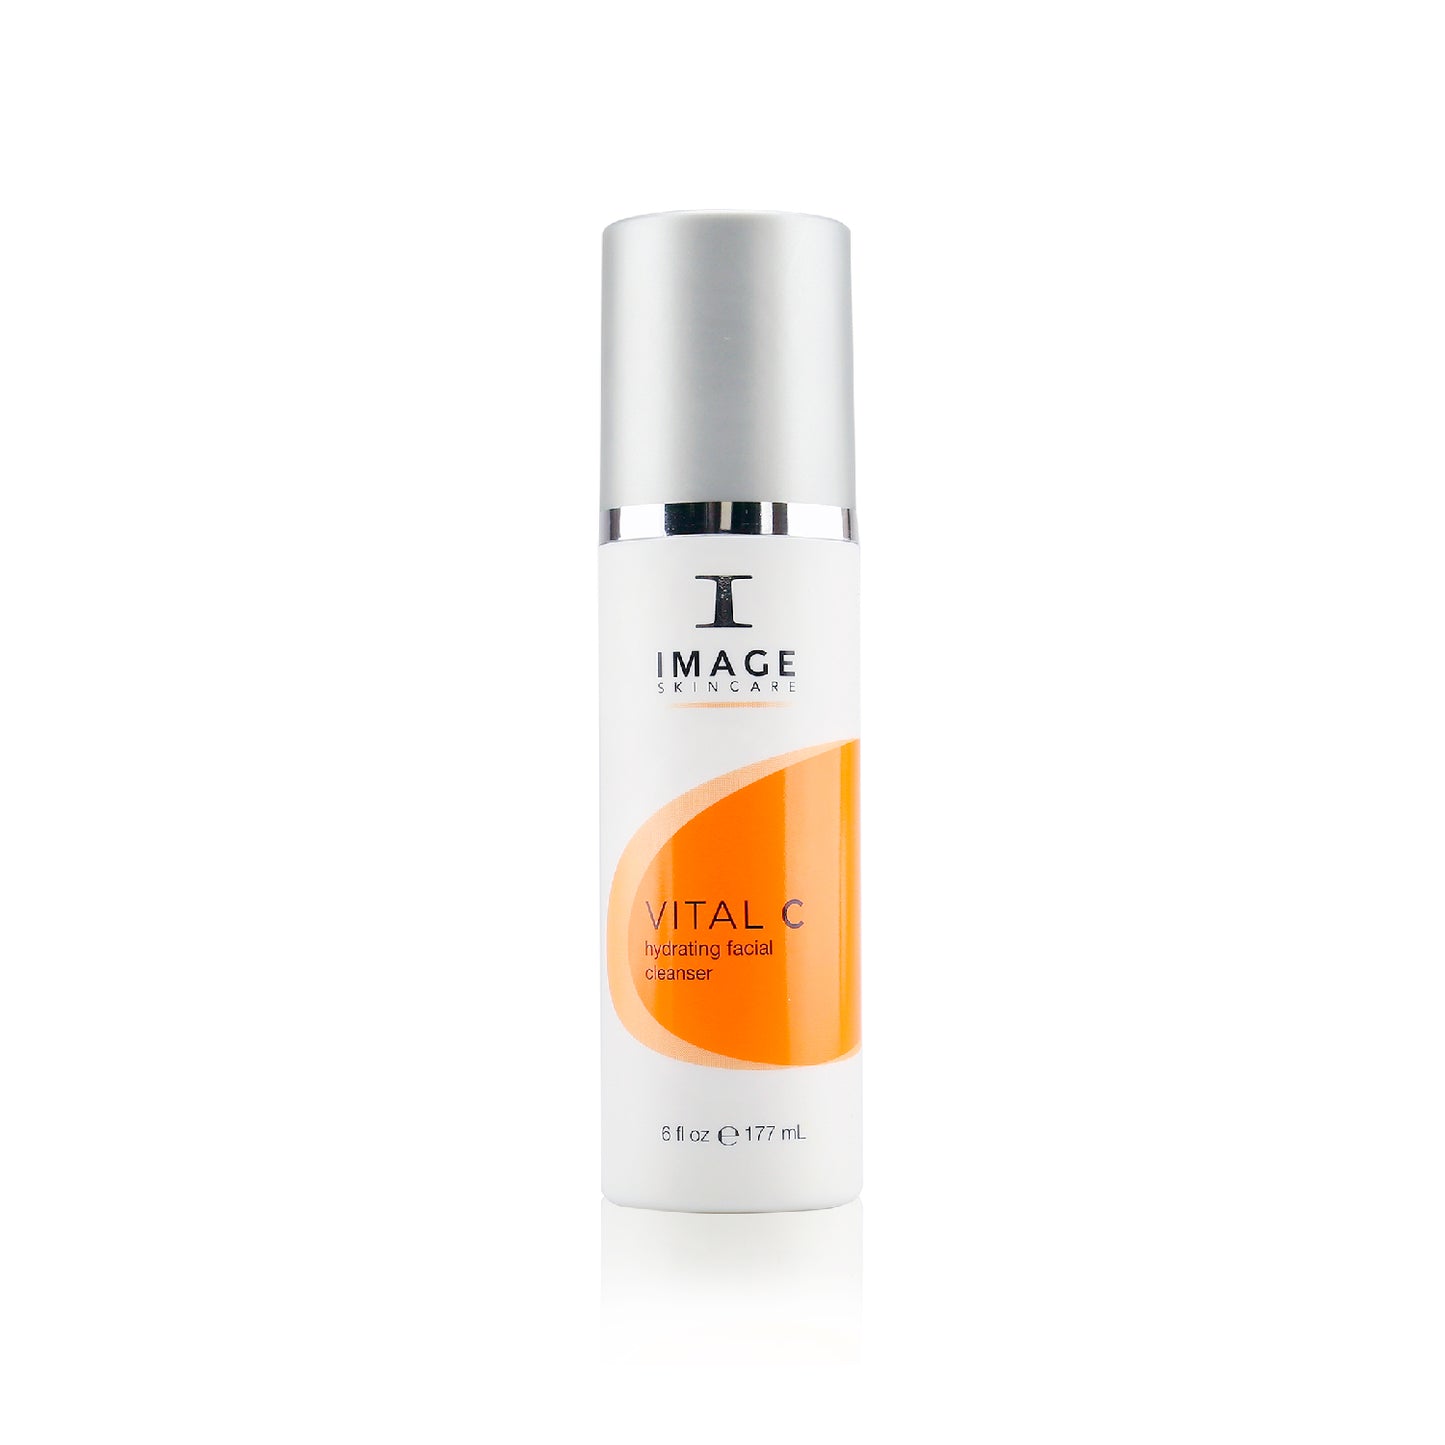 Image Skincare Vital C Hydrating Facial Cleanser